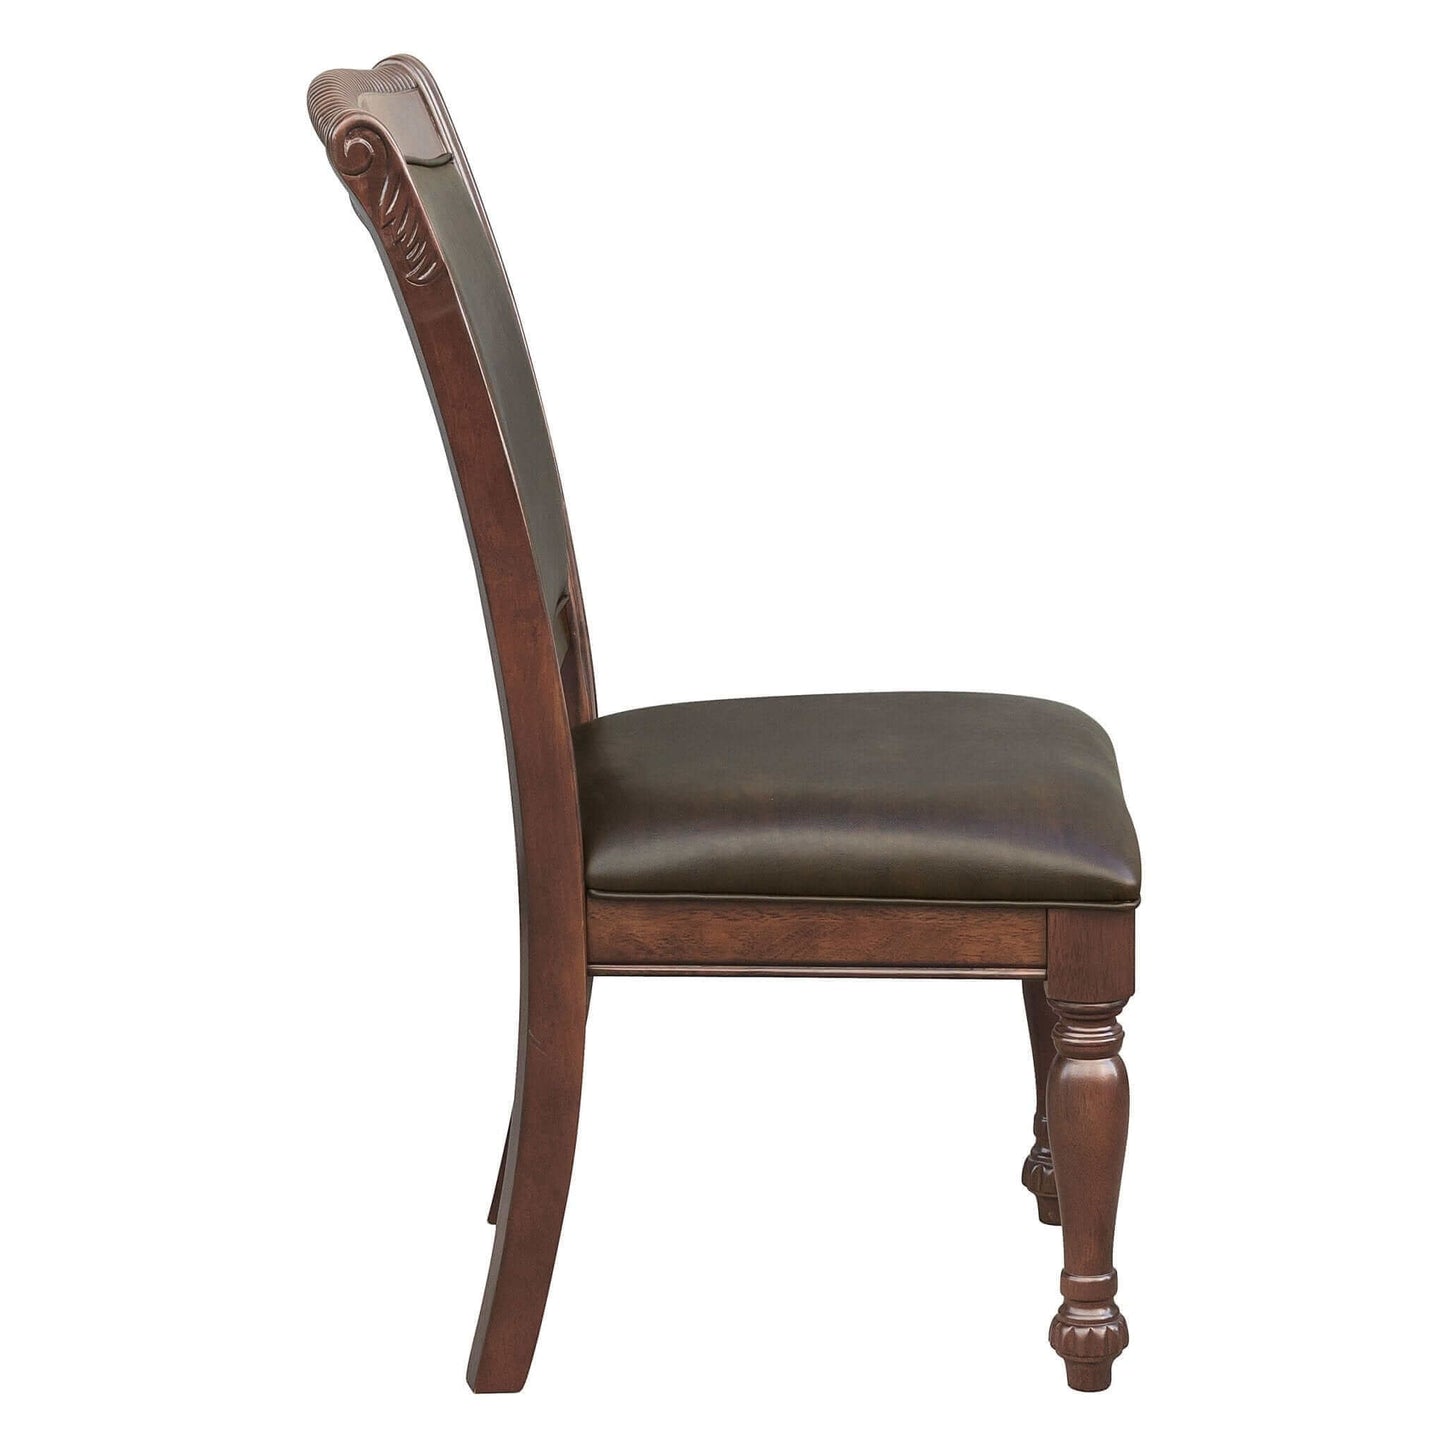 Side view of a brown cherry finish dining chair with cushioned seat from the 5pc Traditional Style Dining Table & 4 Chairs set